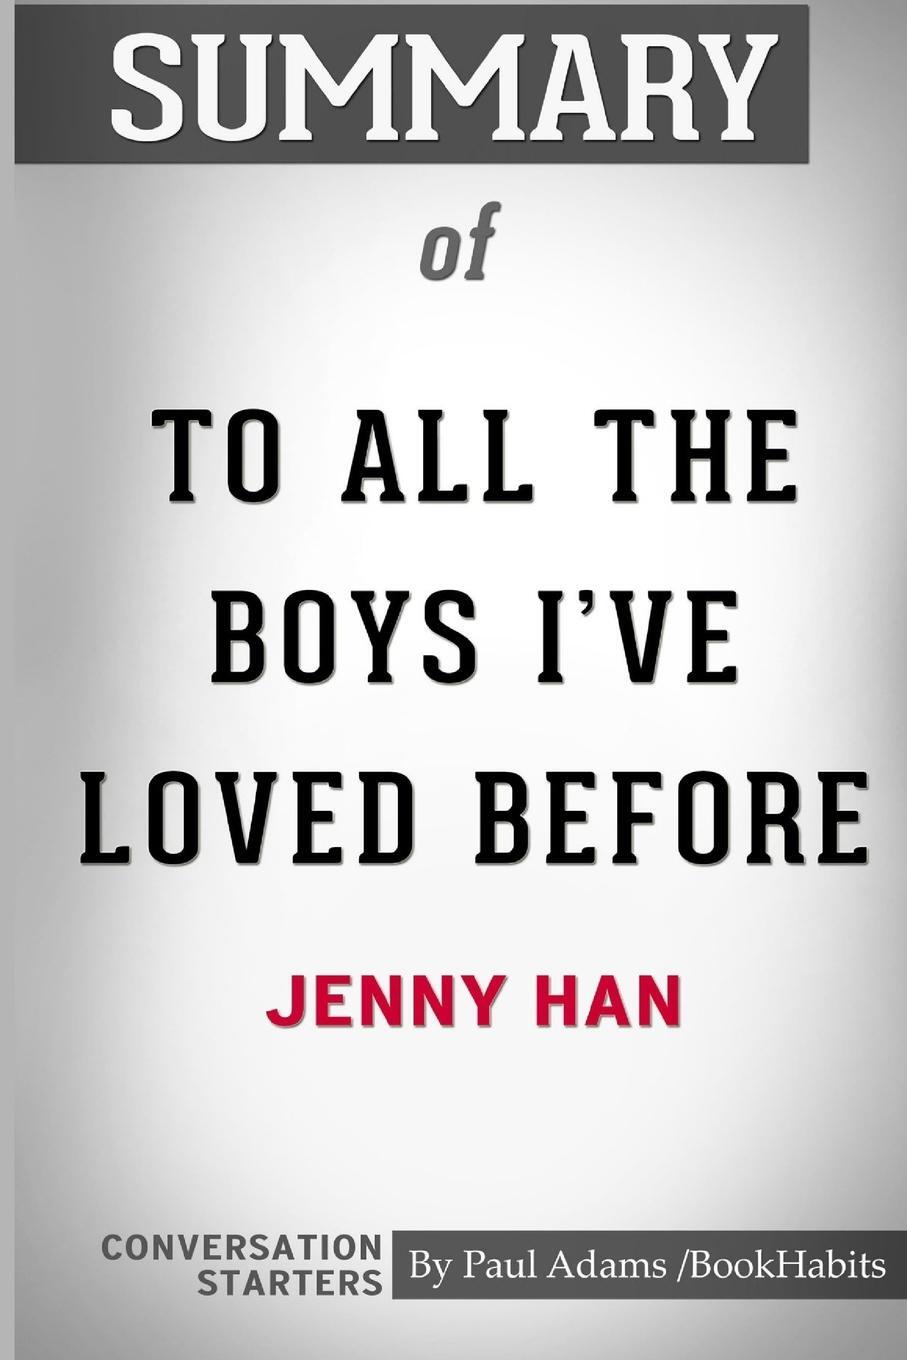 фото Summary of To All The Boys I've Loved Before by Jenny Han. Conversation Starters